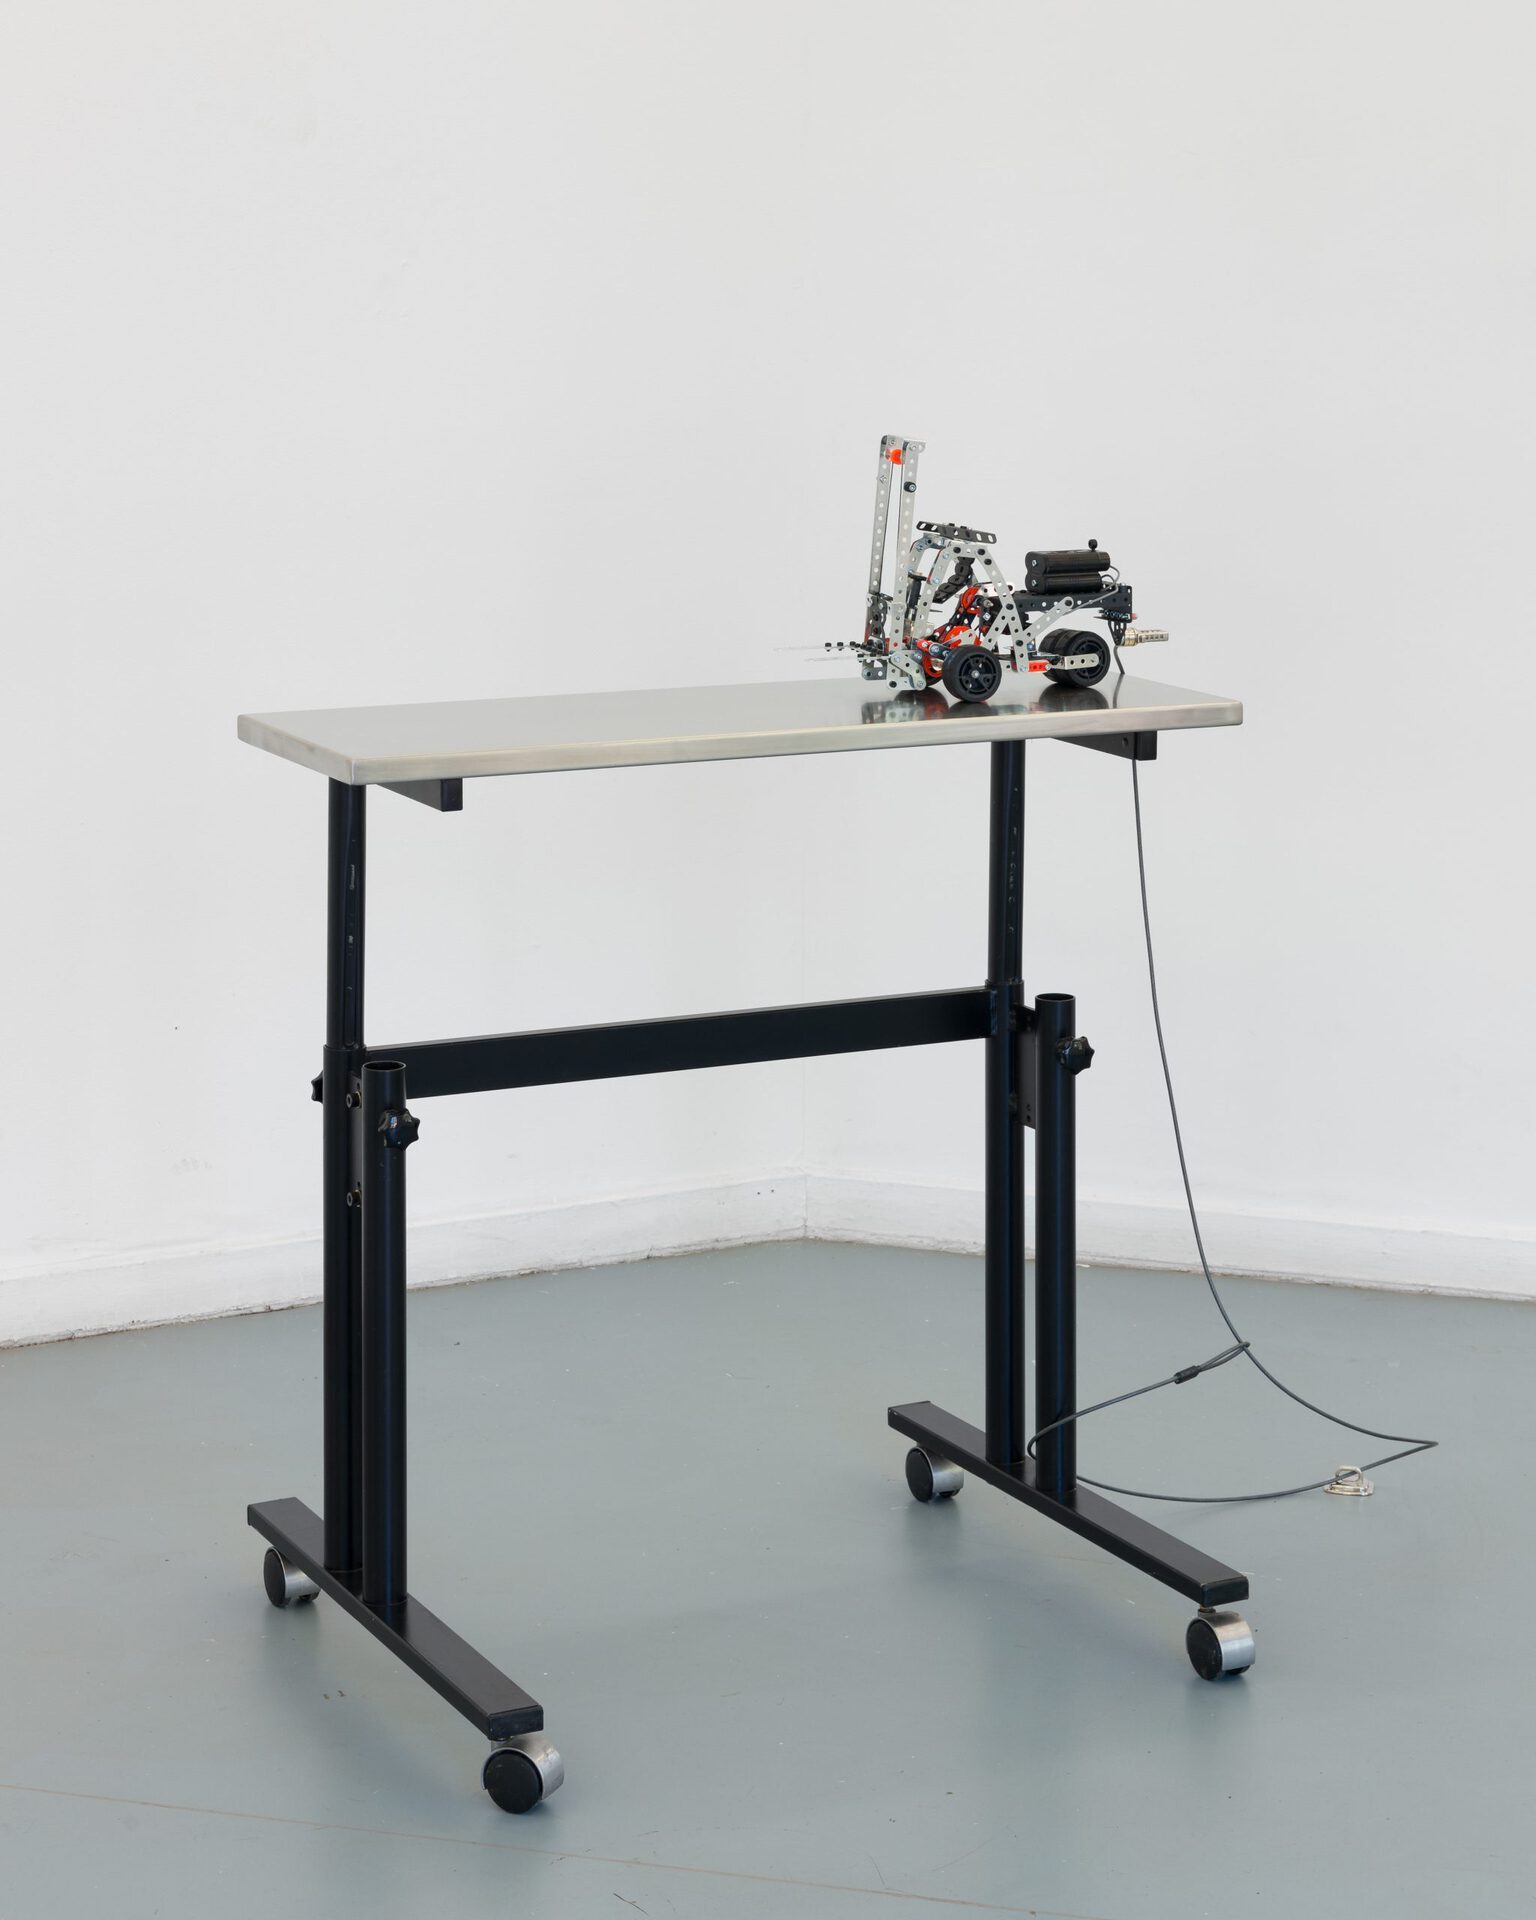 valdemar bisgaard, consequential damages arising, 2022, Meccano build, Defcon cable lock, Labofa trolley table frame - stainless steel